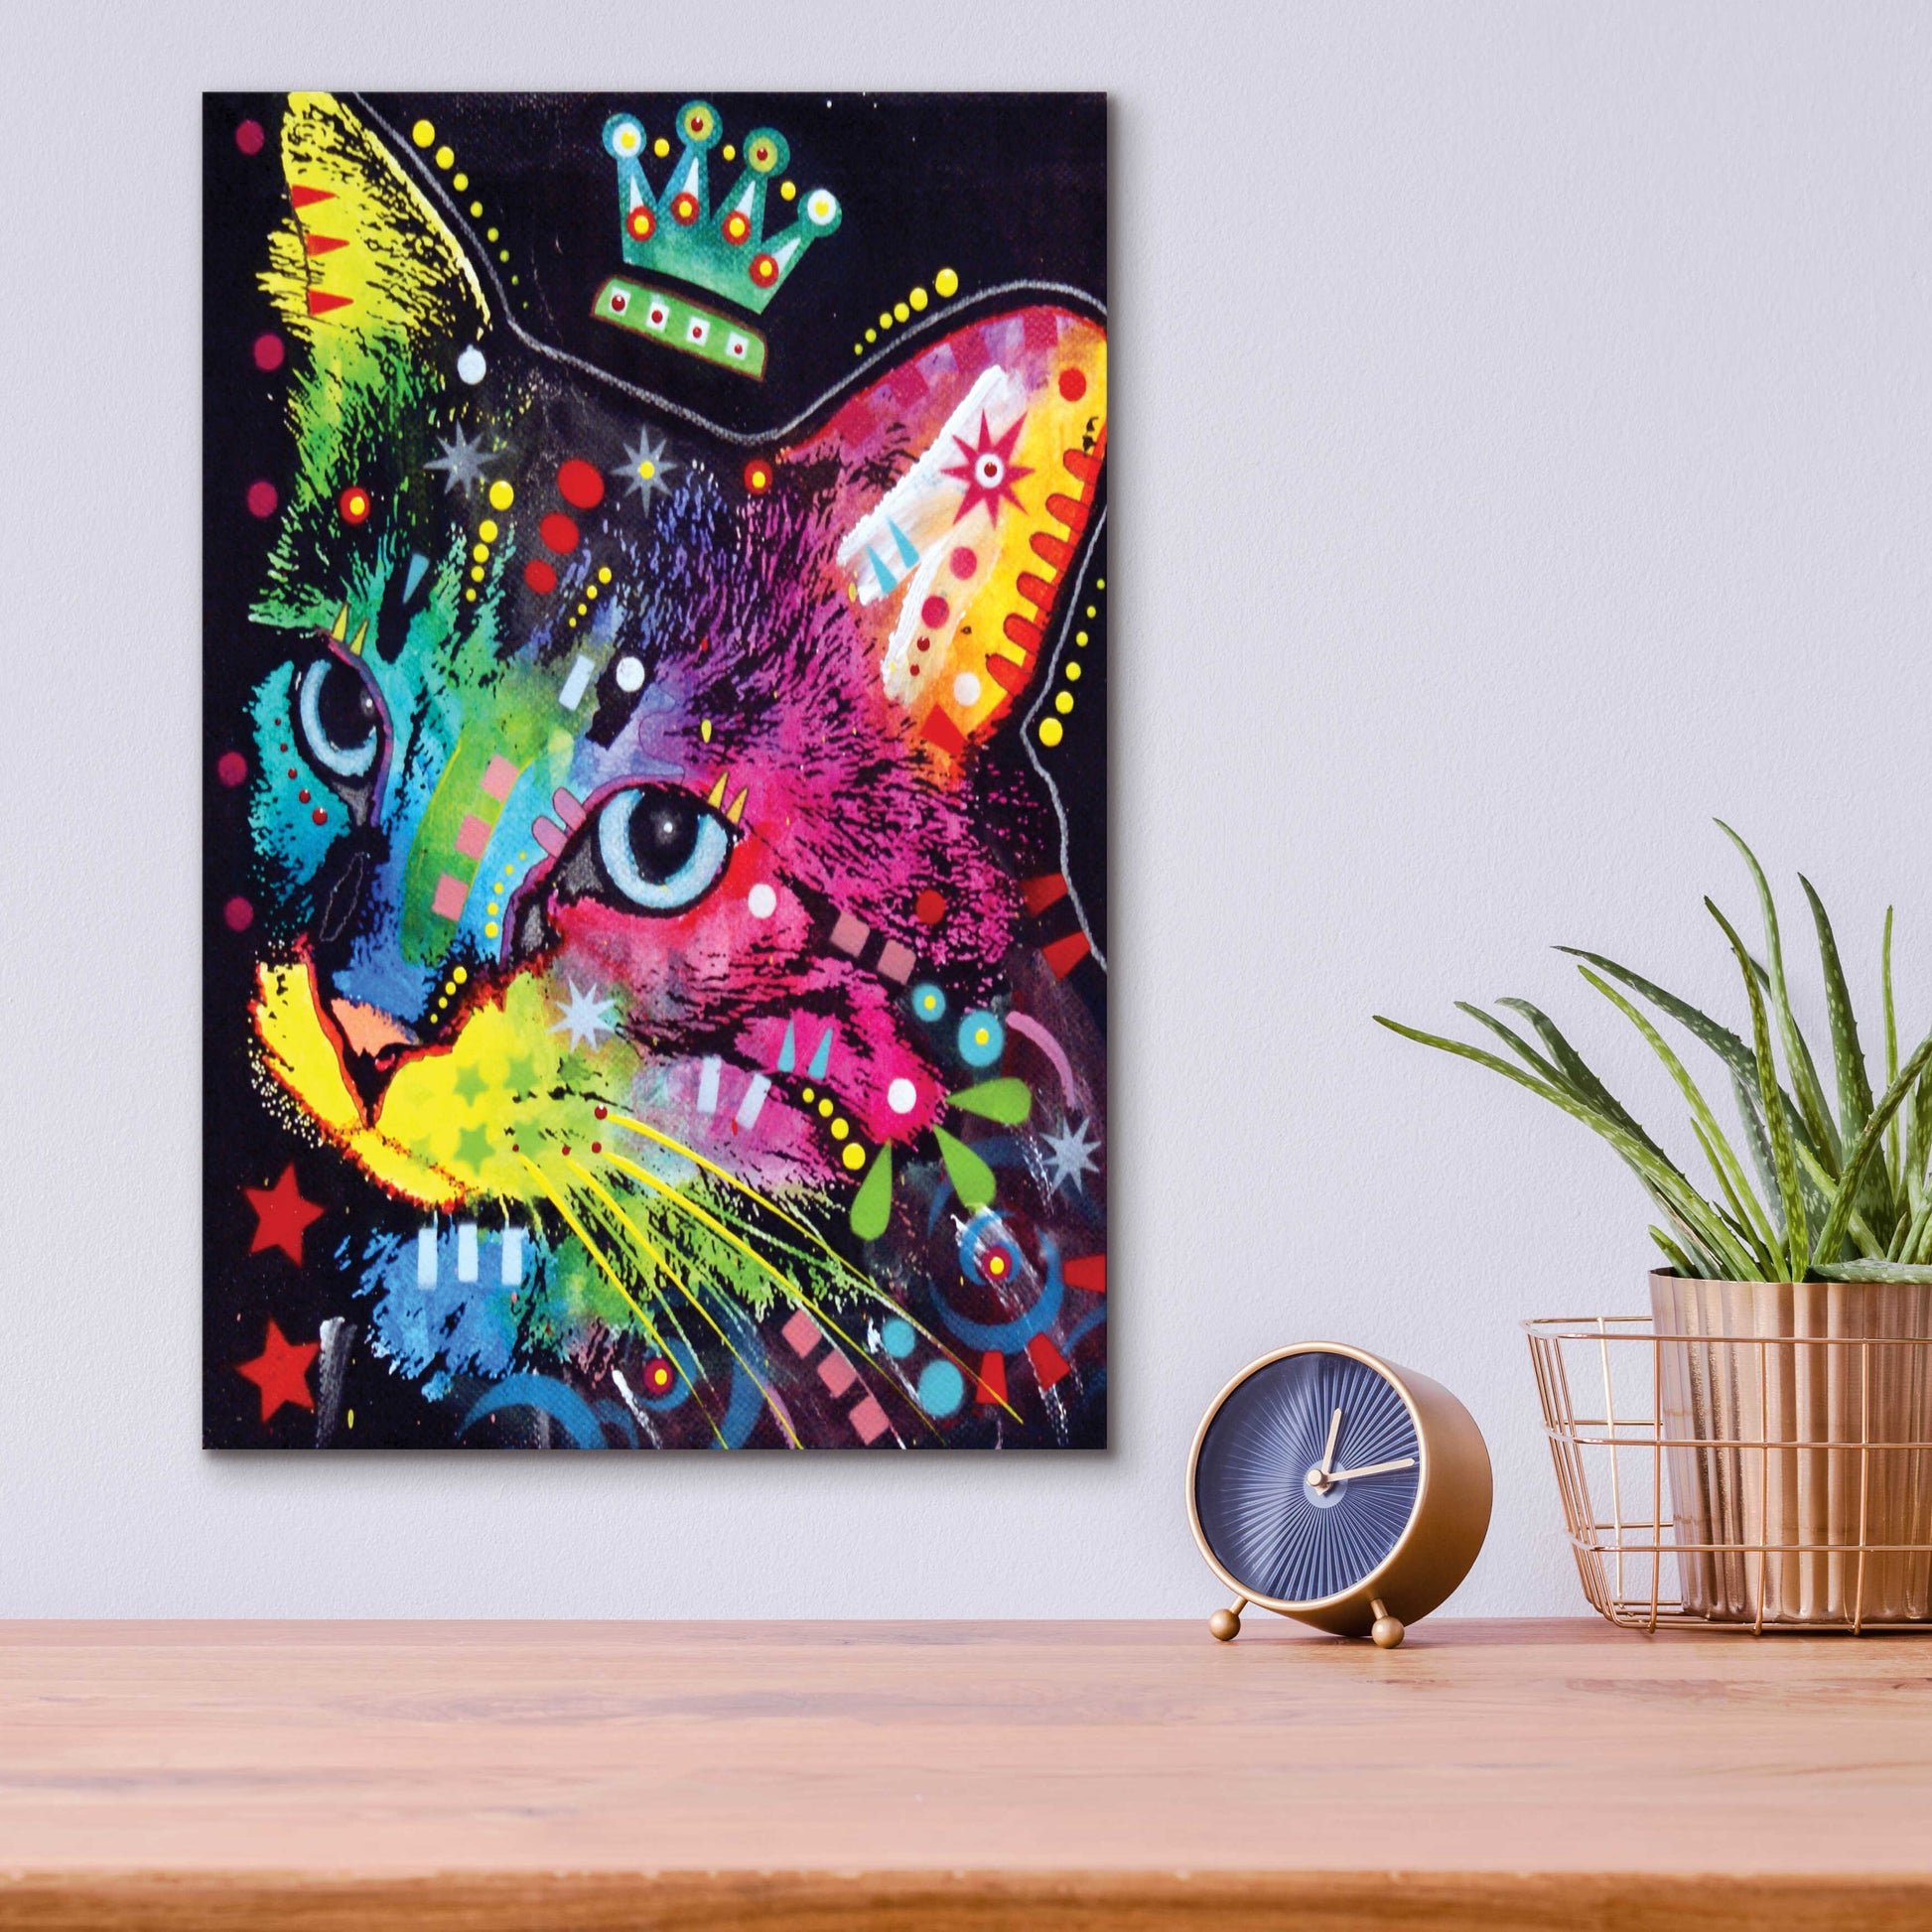 Epic Art 'Thinking Cat Crowned' by Dean Russo, Acrylic Glass Wall Art,12x16